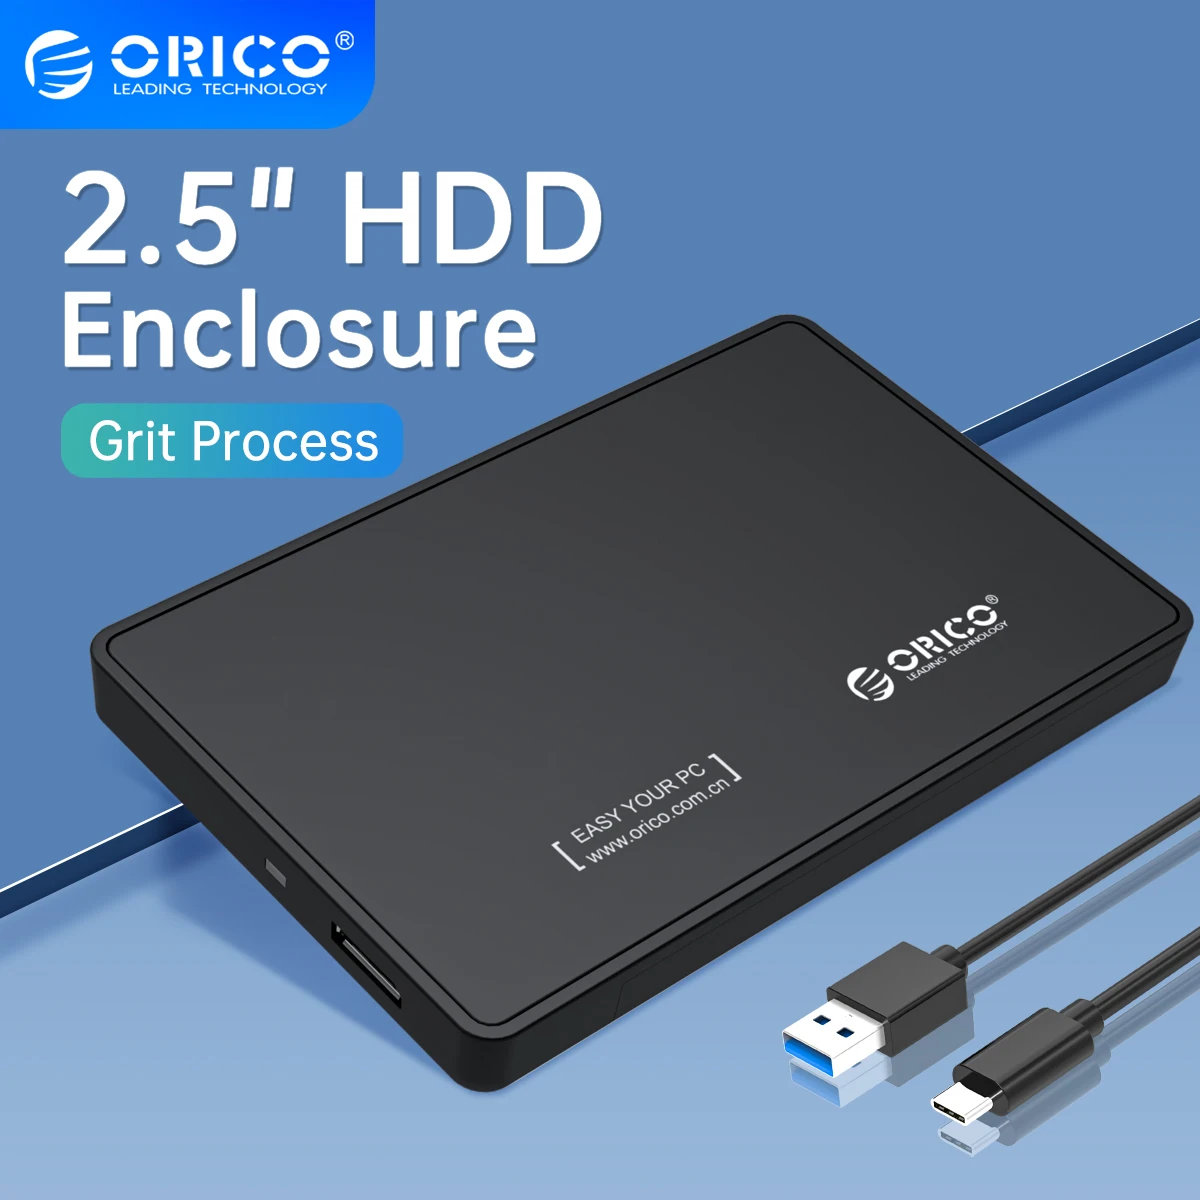 ORICO 2.5 inch External Hard Drive Enclosure USB3.0 to SATA HDD Case Compatible with 2.5 inch 7mm-9mm HDD / SSD